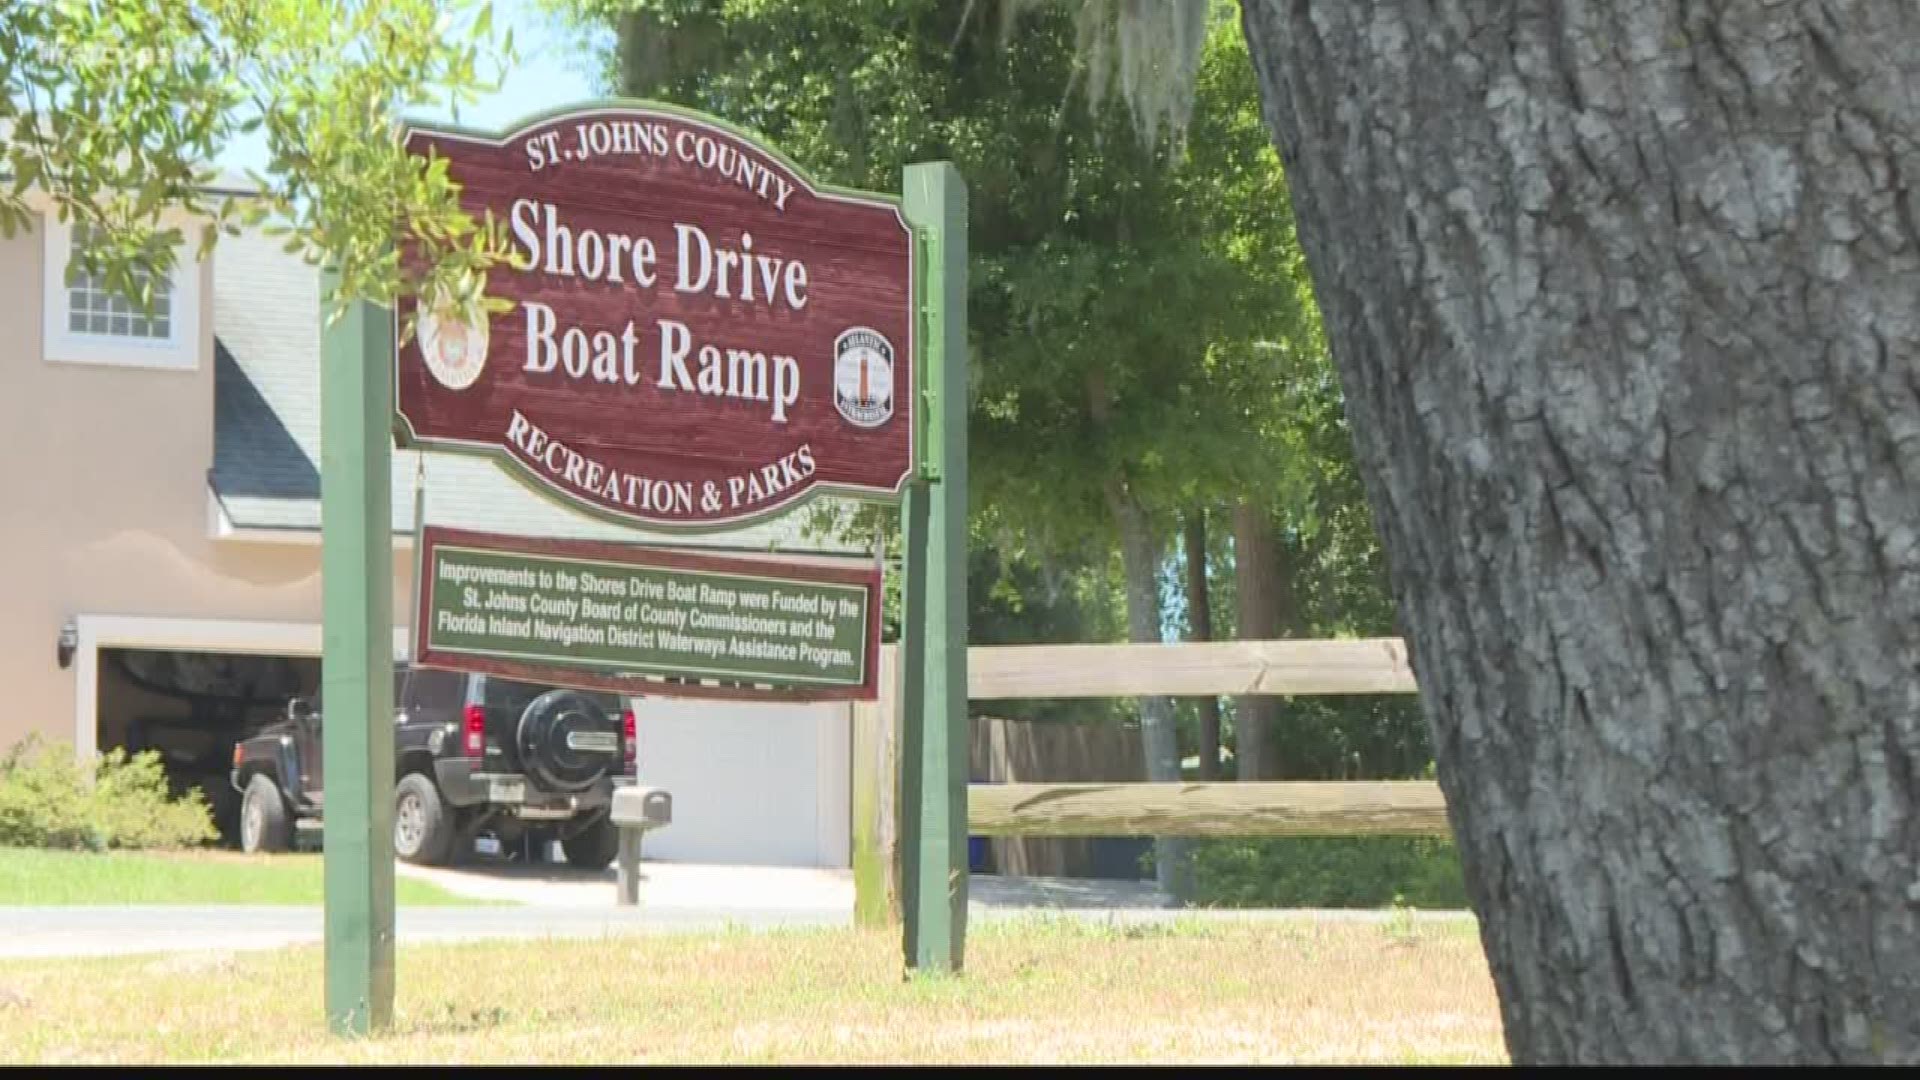 The child, who was 9-year-old, was hit when a car backing up at the Moultrie Creek Boat pinned him between the open car door and a wooden piling. According to a witness, the impact threw his head against the piling with force.